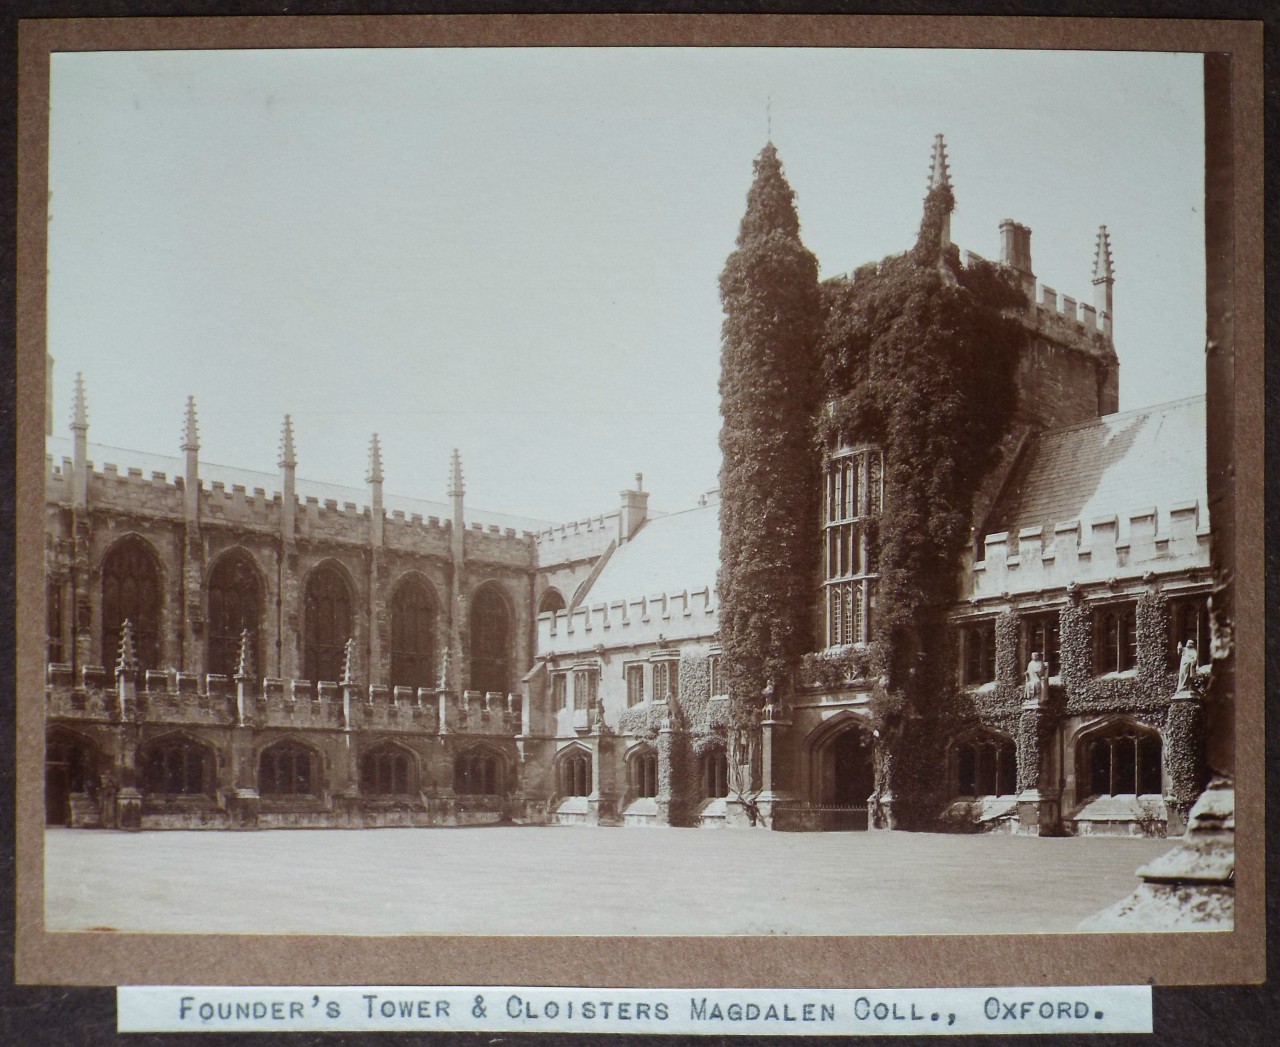 Photograph - Founder's Tower & Cloisters Magdalen Coll., Oxford.